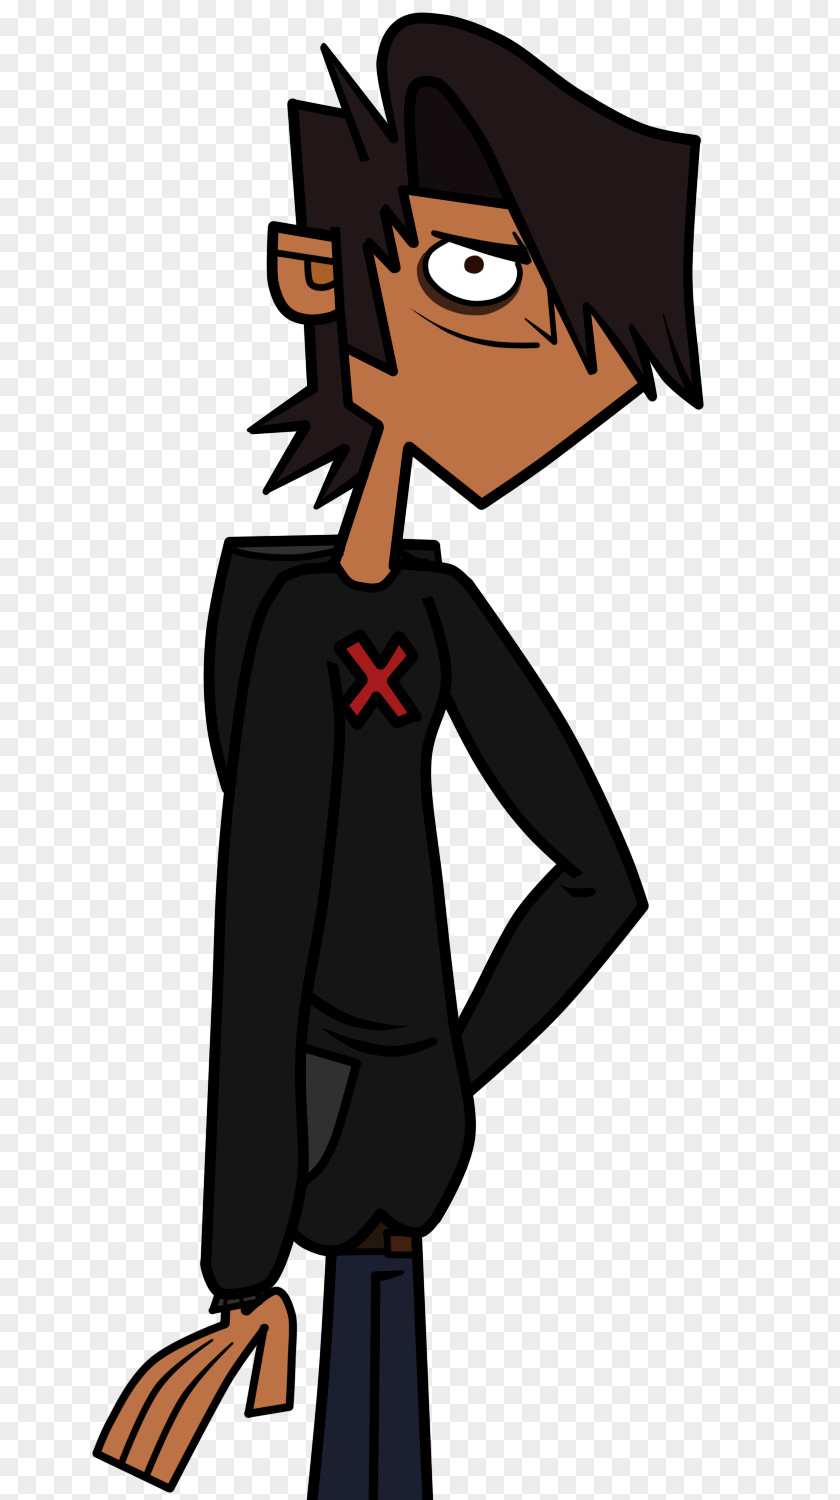 Mike LeShawna Television Show Fan Art Total Drama Island Character PNG